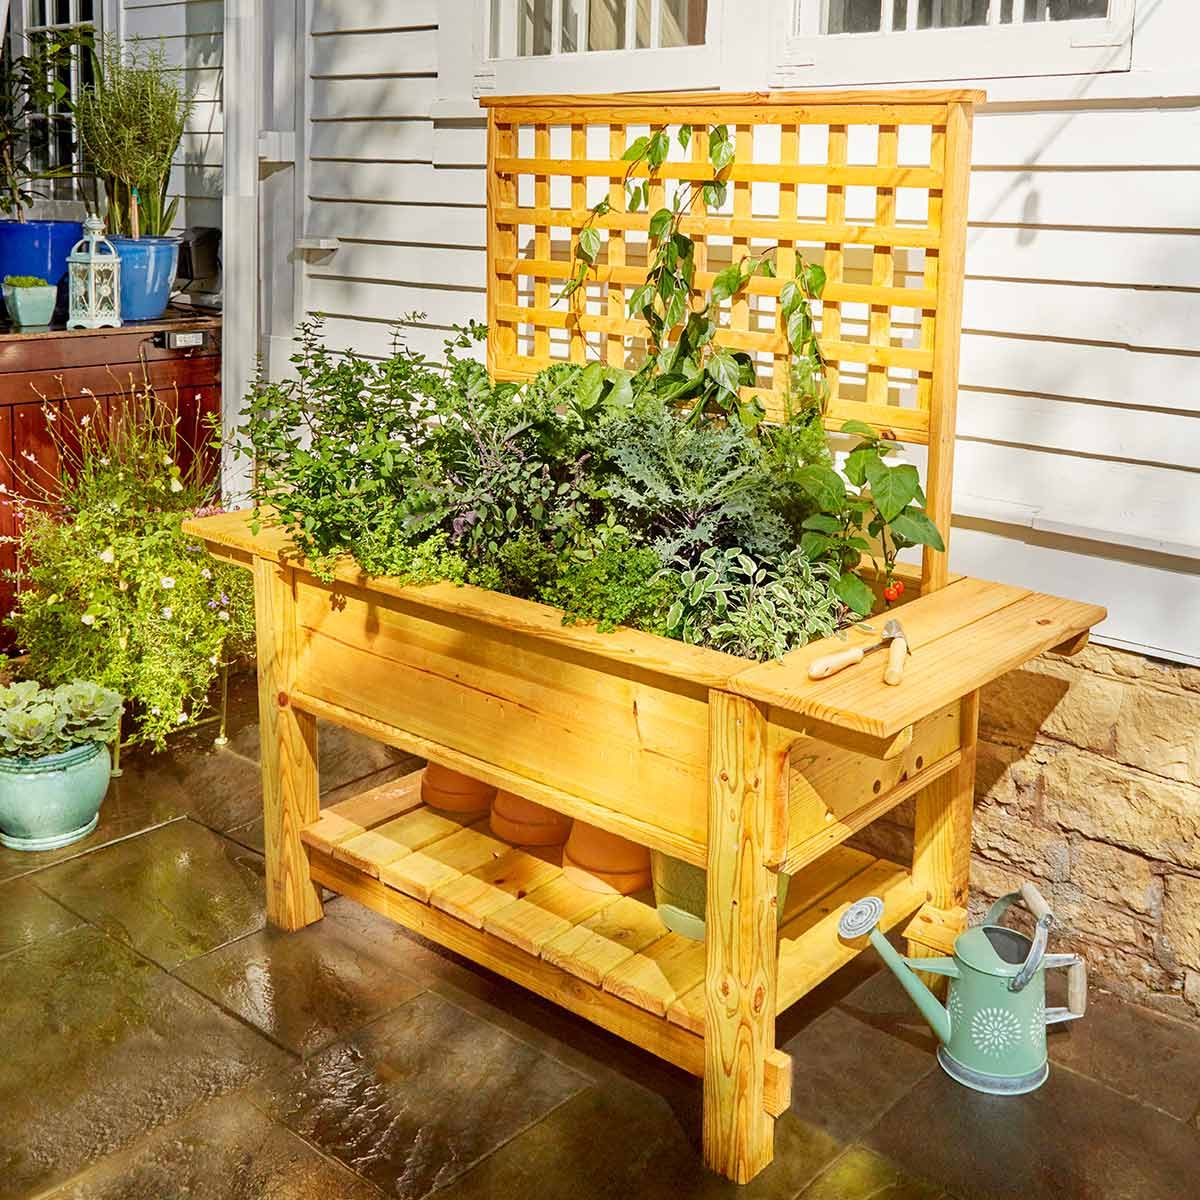 Woodworking projects for garden